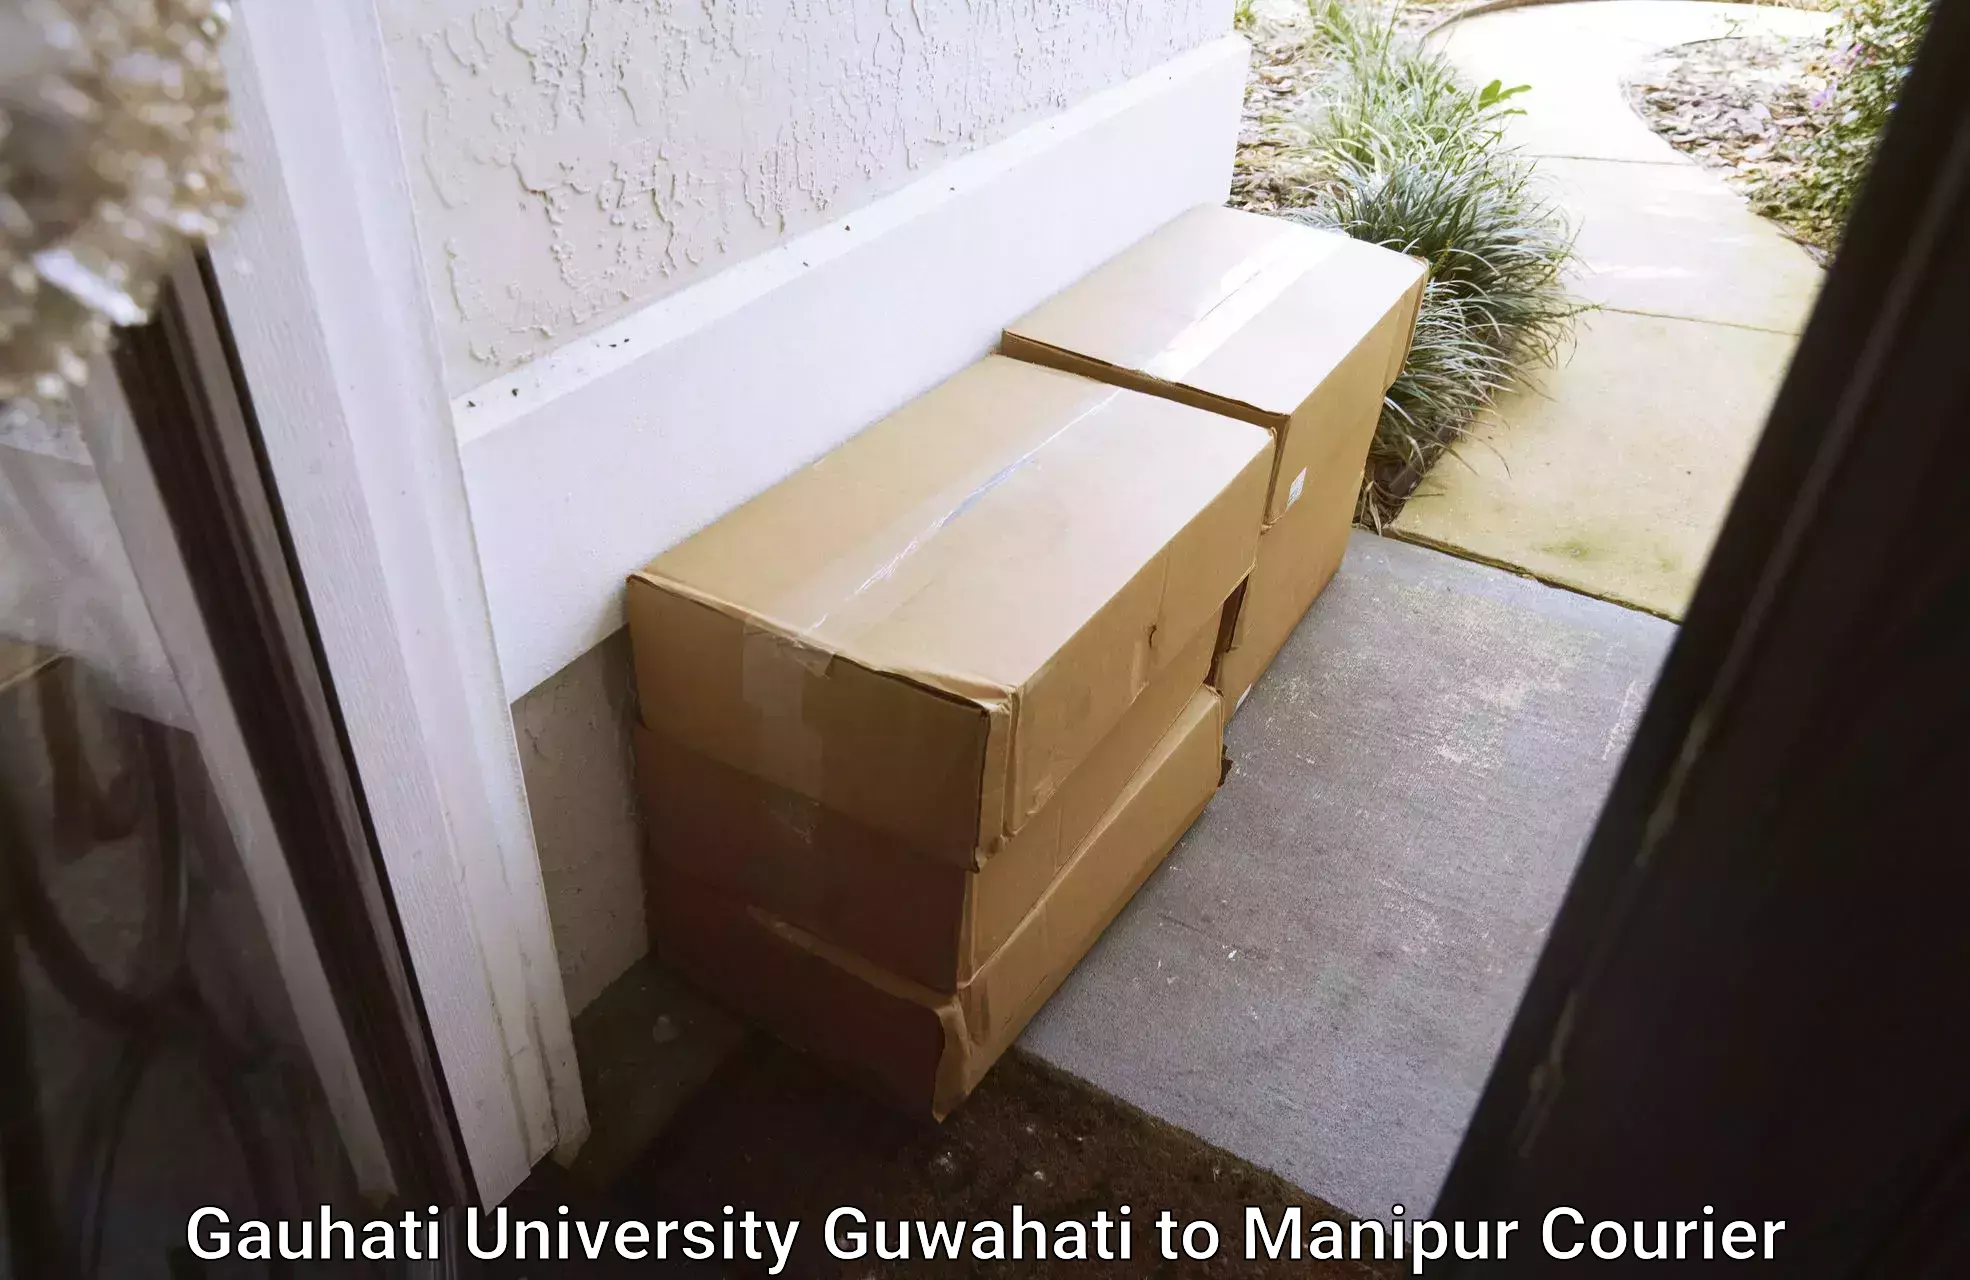 Easy access courier services Gauhati University Guwahati to Manipur